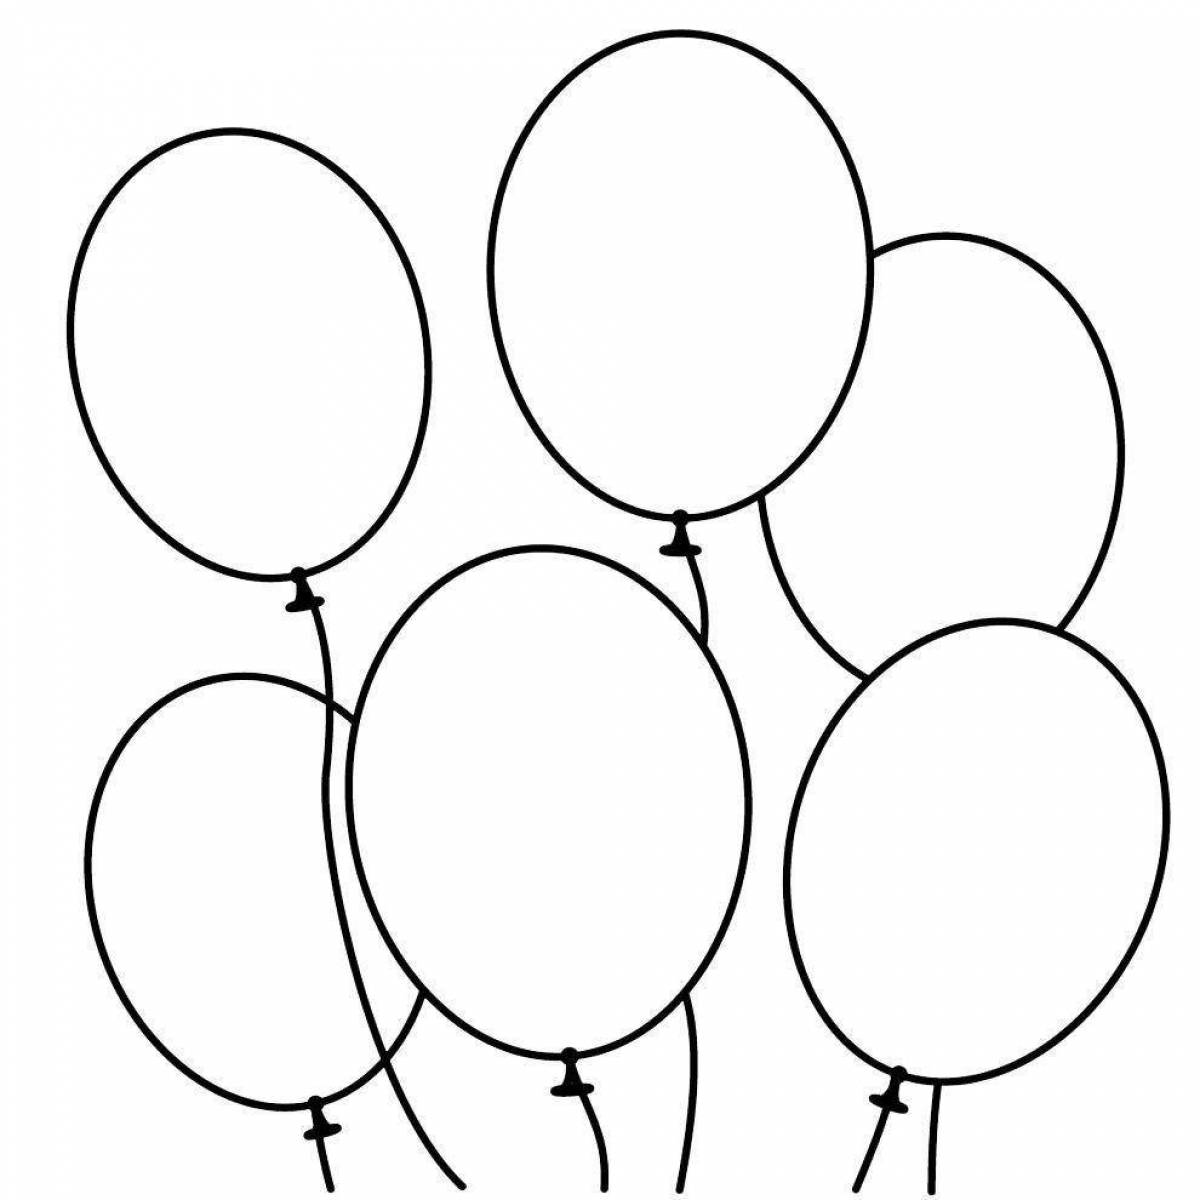 Coloring page with colorful balloons